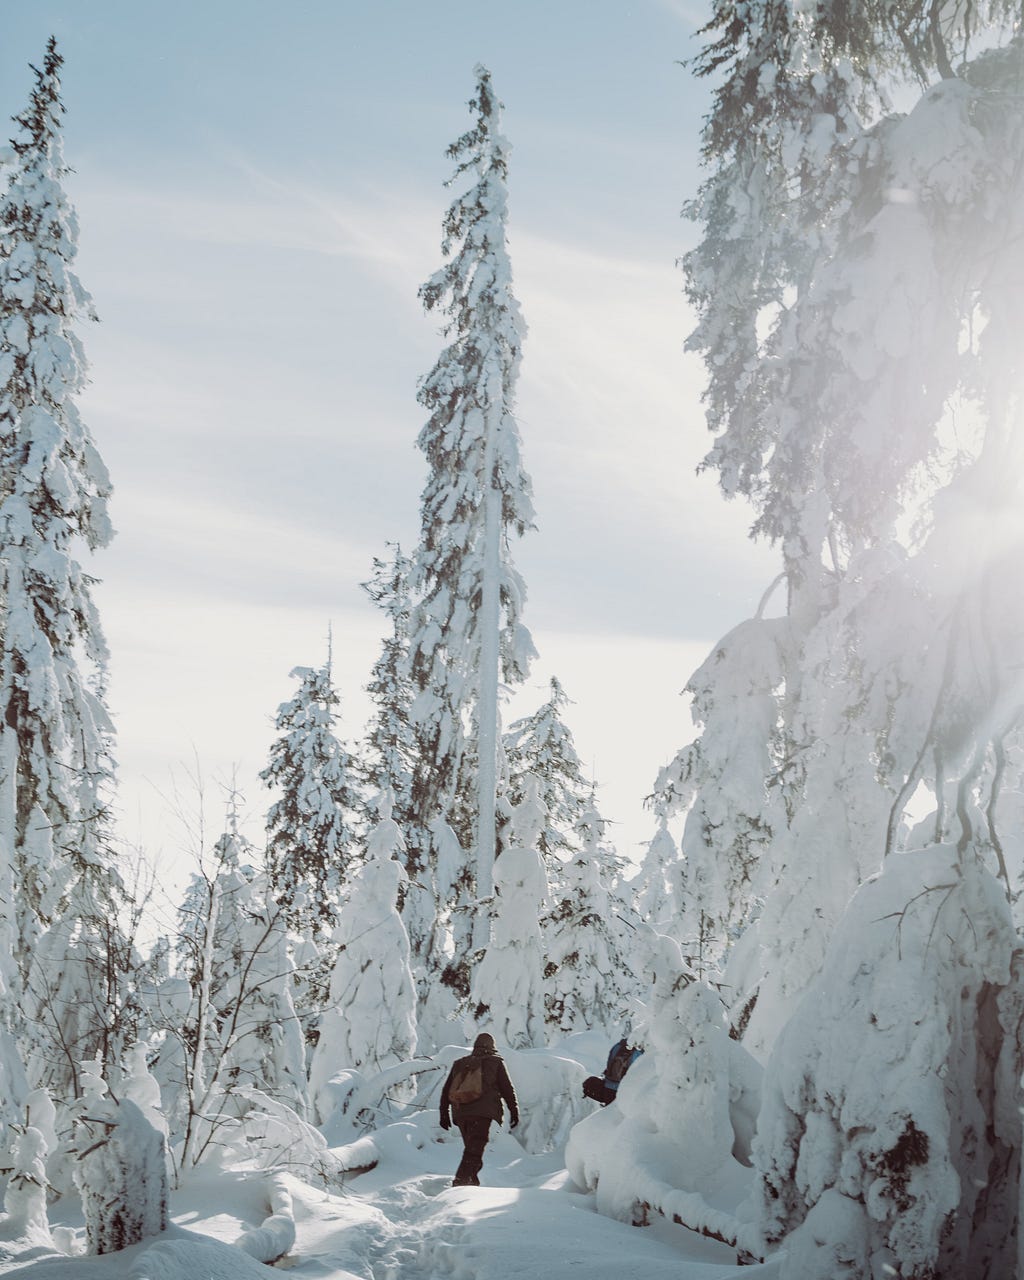 Photo of man in snow surrounded by trees with sun shining down in cloudy winter weather. Photo on Dr. James Goydos 2021 article on sunburn in winter.